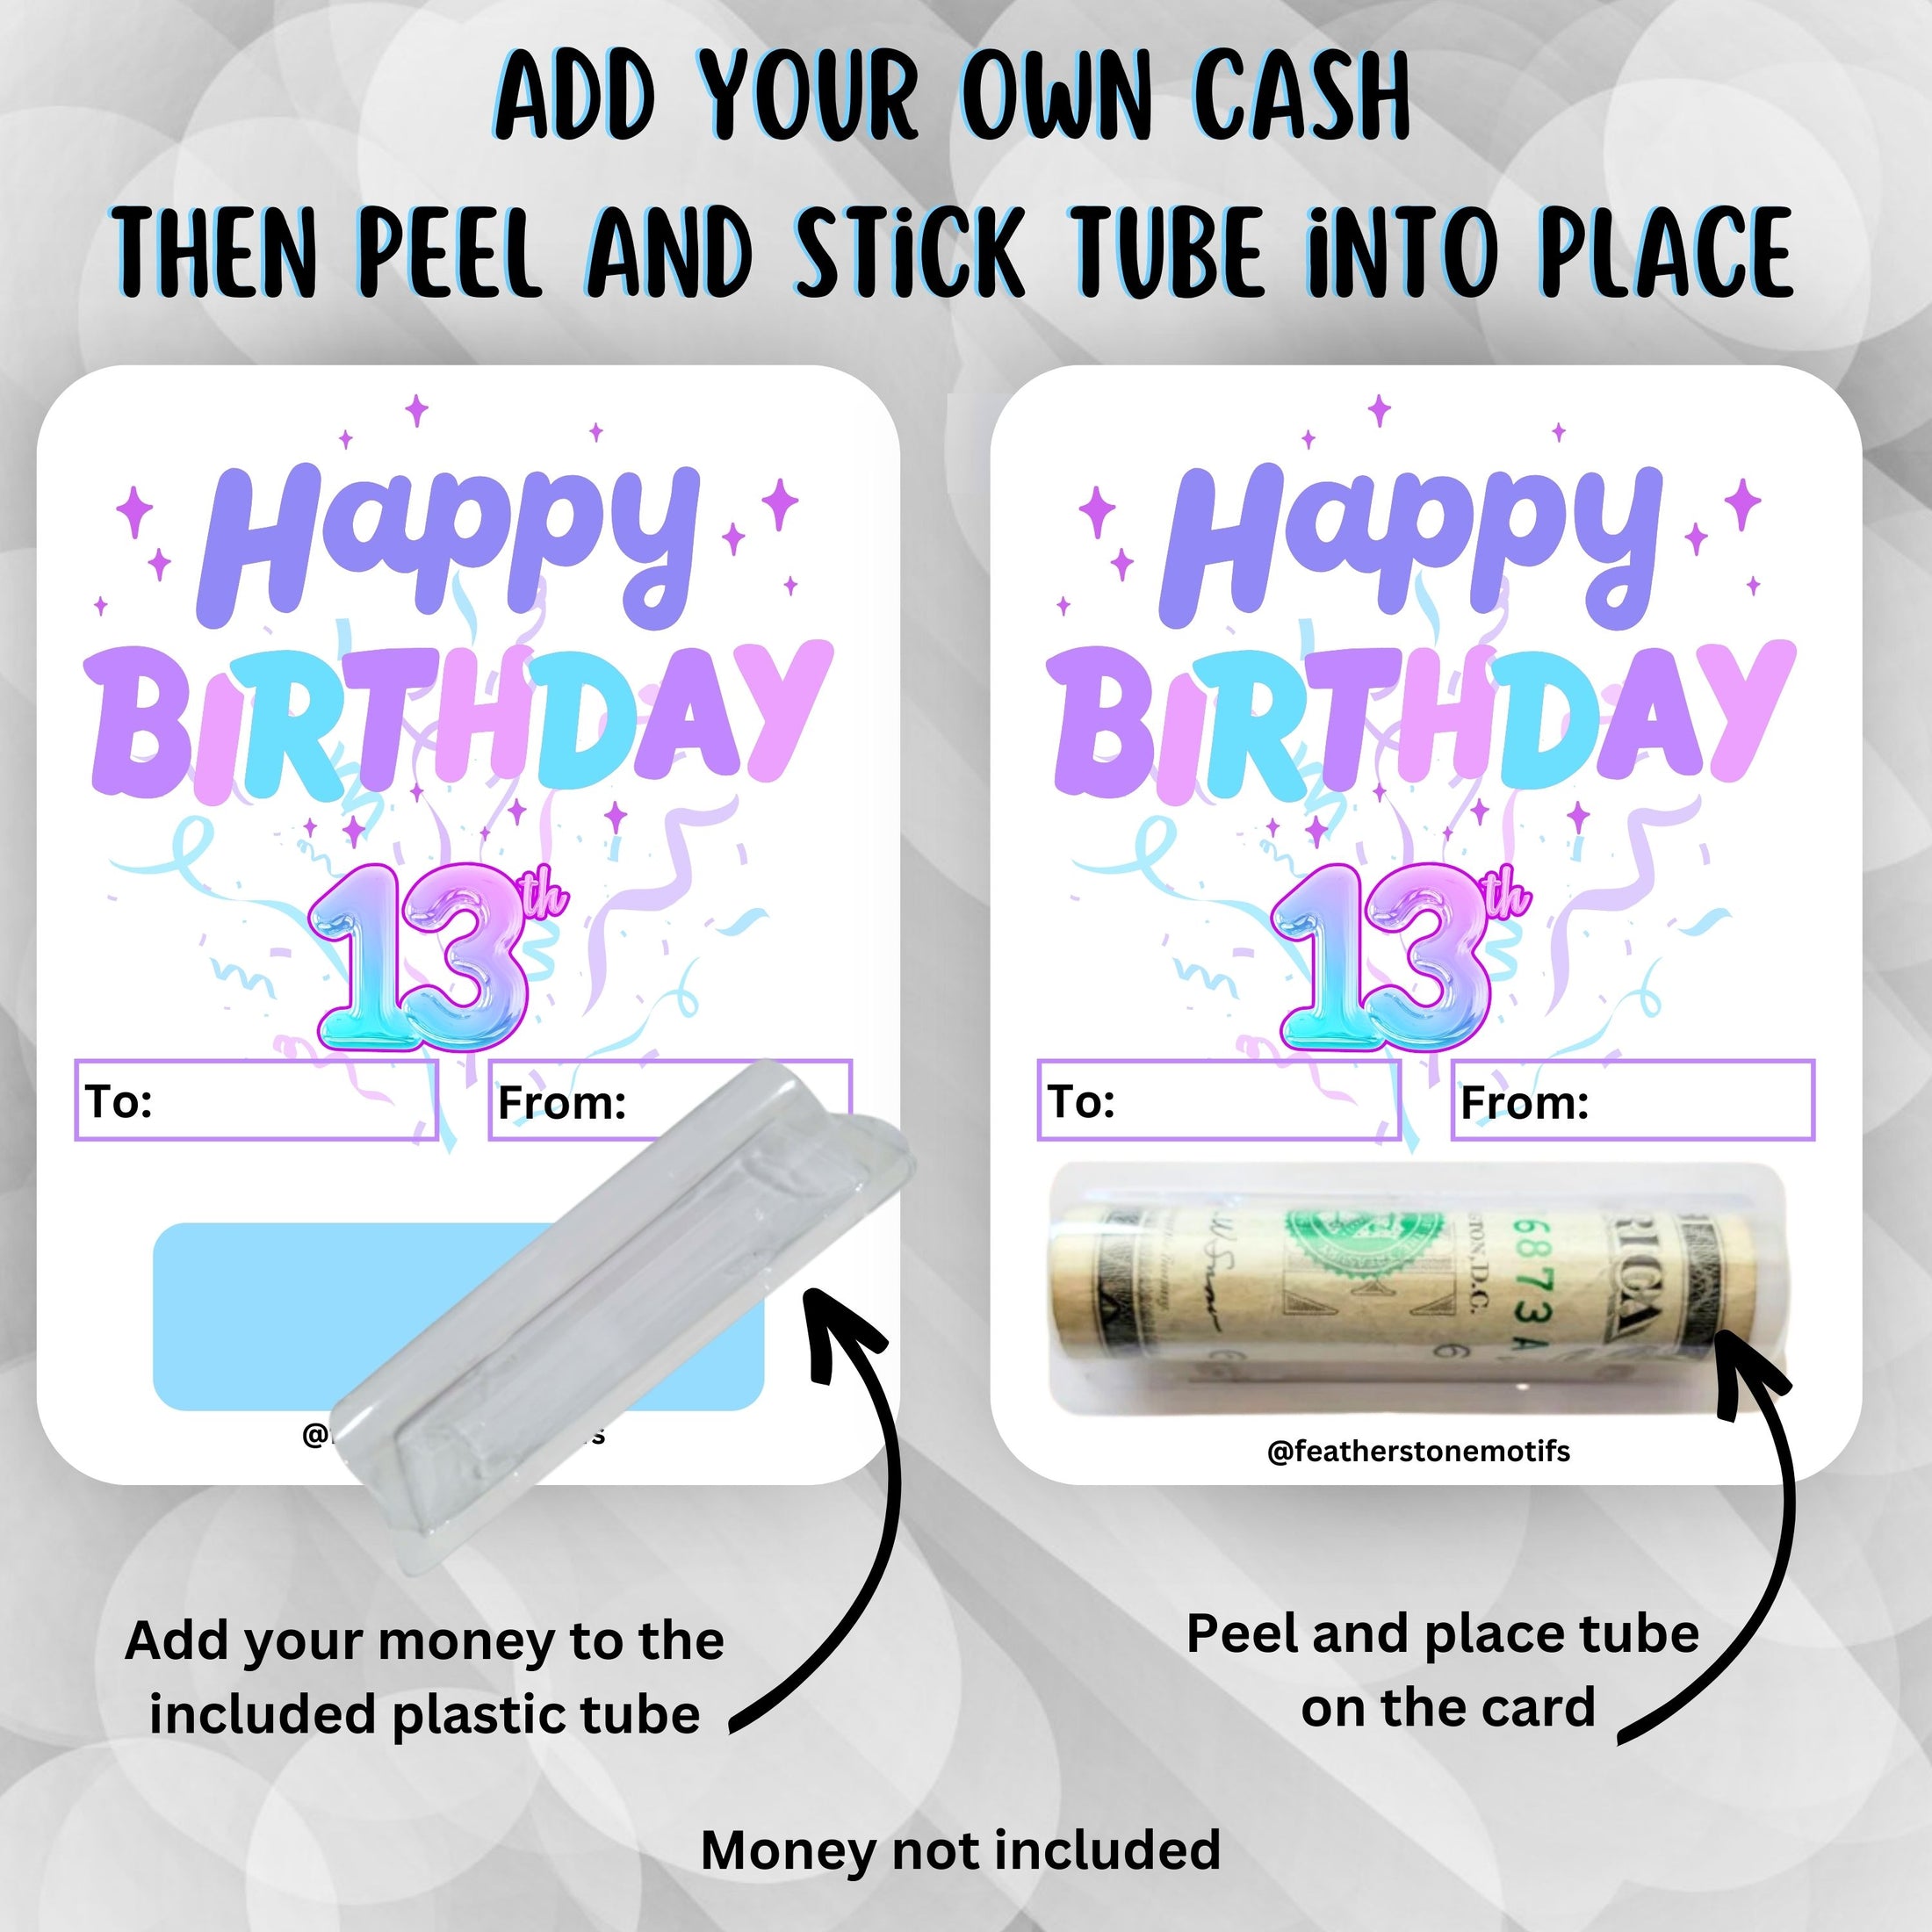 This image shows how to apply the money tube to the 13th Birthday money card.